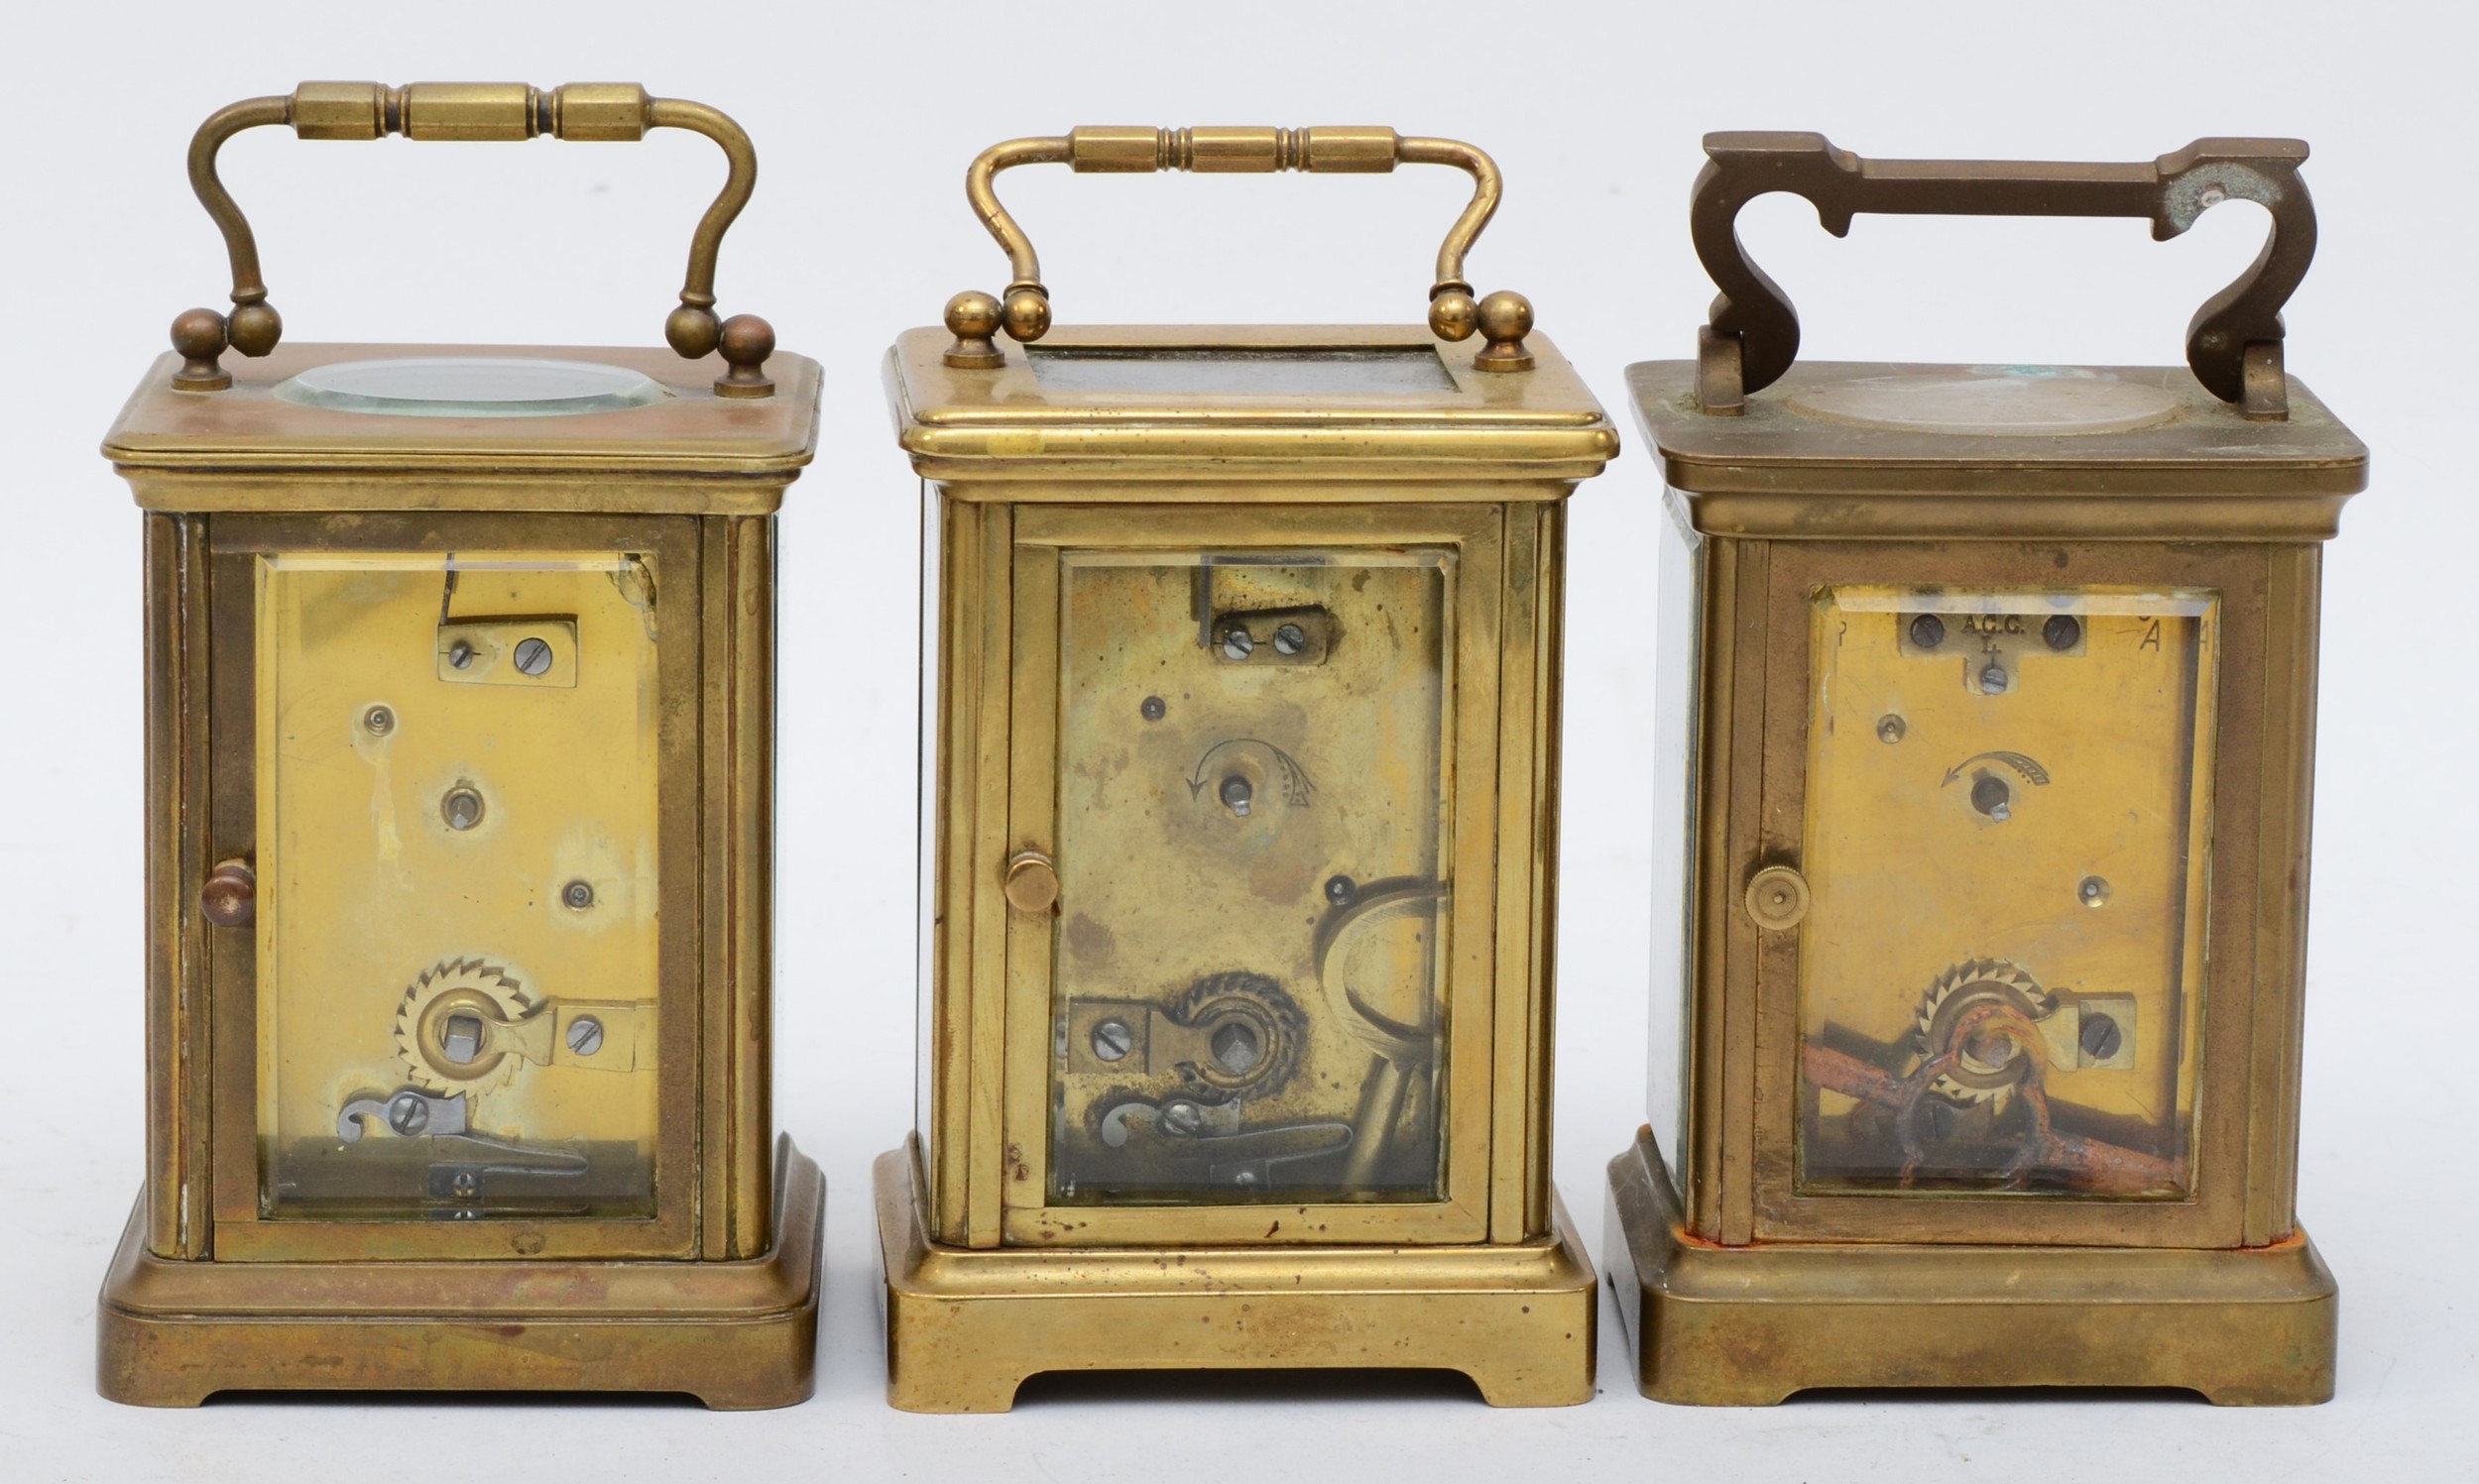 Three 20th century brass cased carriage clocks, each with white dials and black Roman numeral and - Image 3 of 5